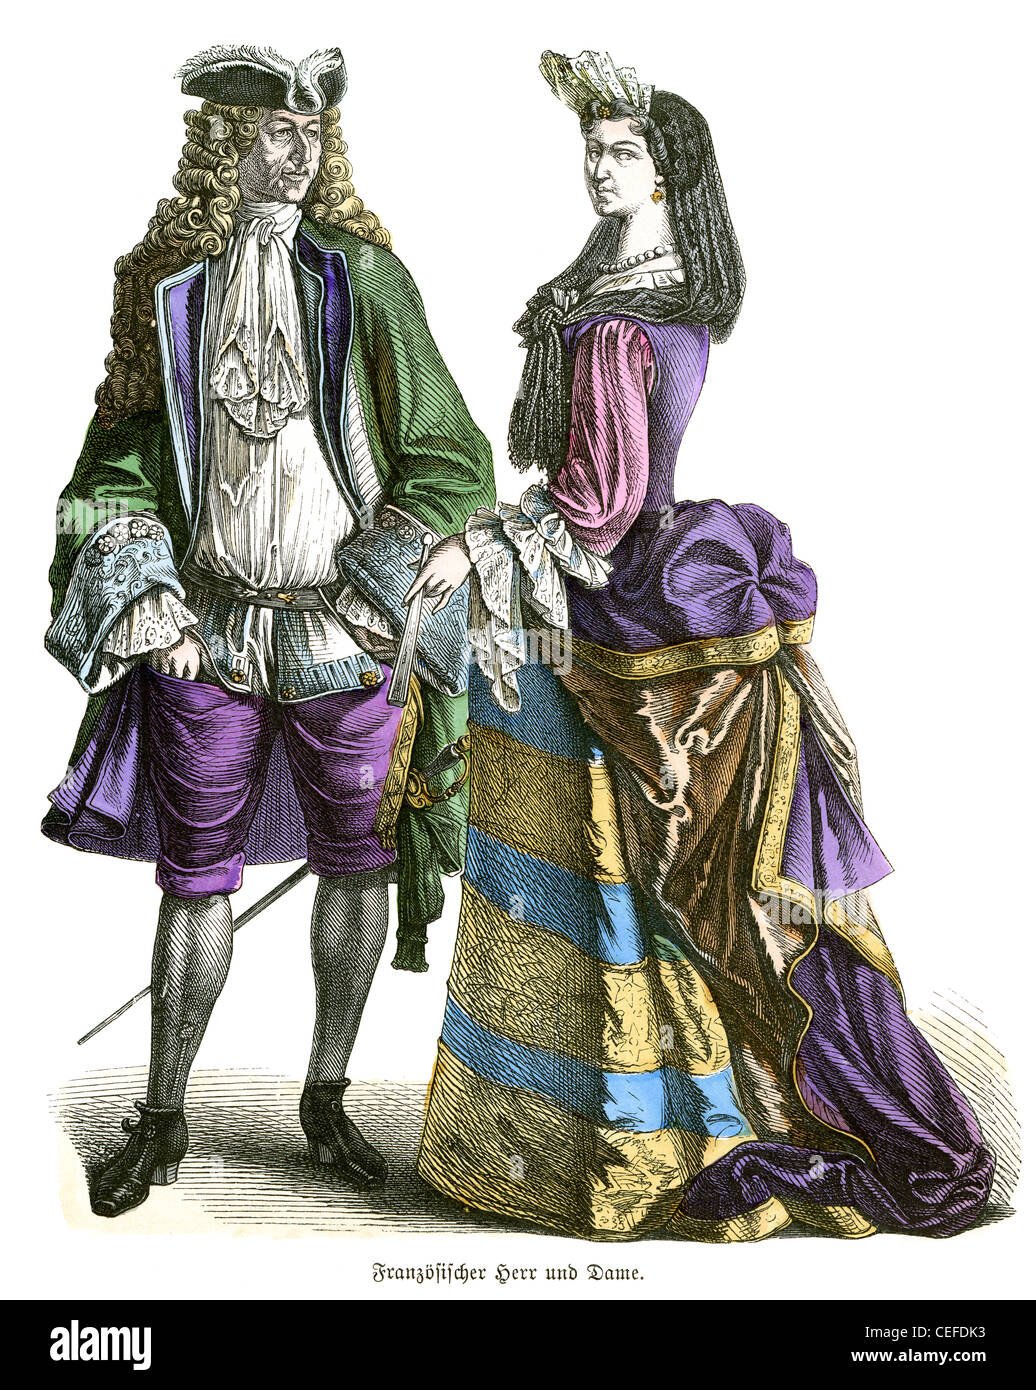 A french lord and lady from the first third of the 18th century Stock Photo